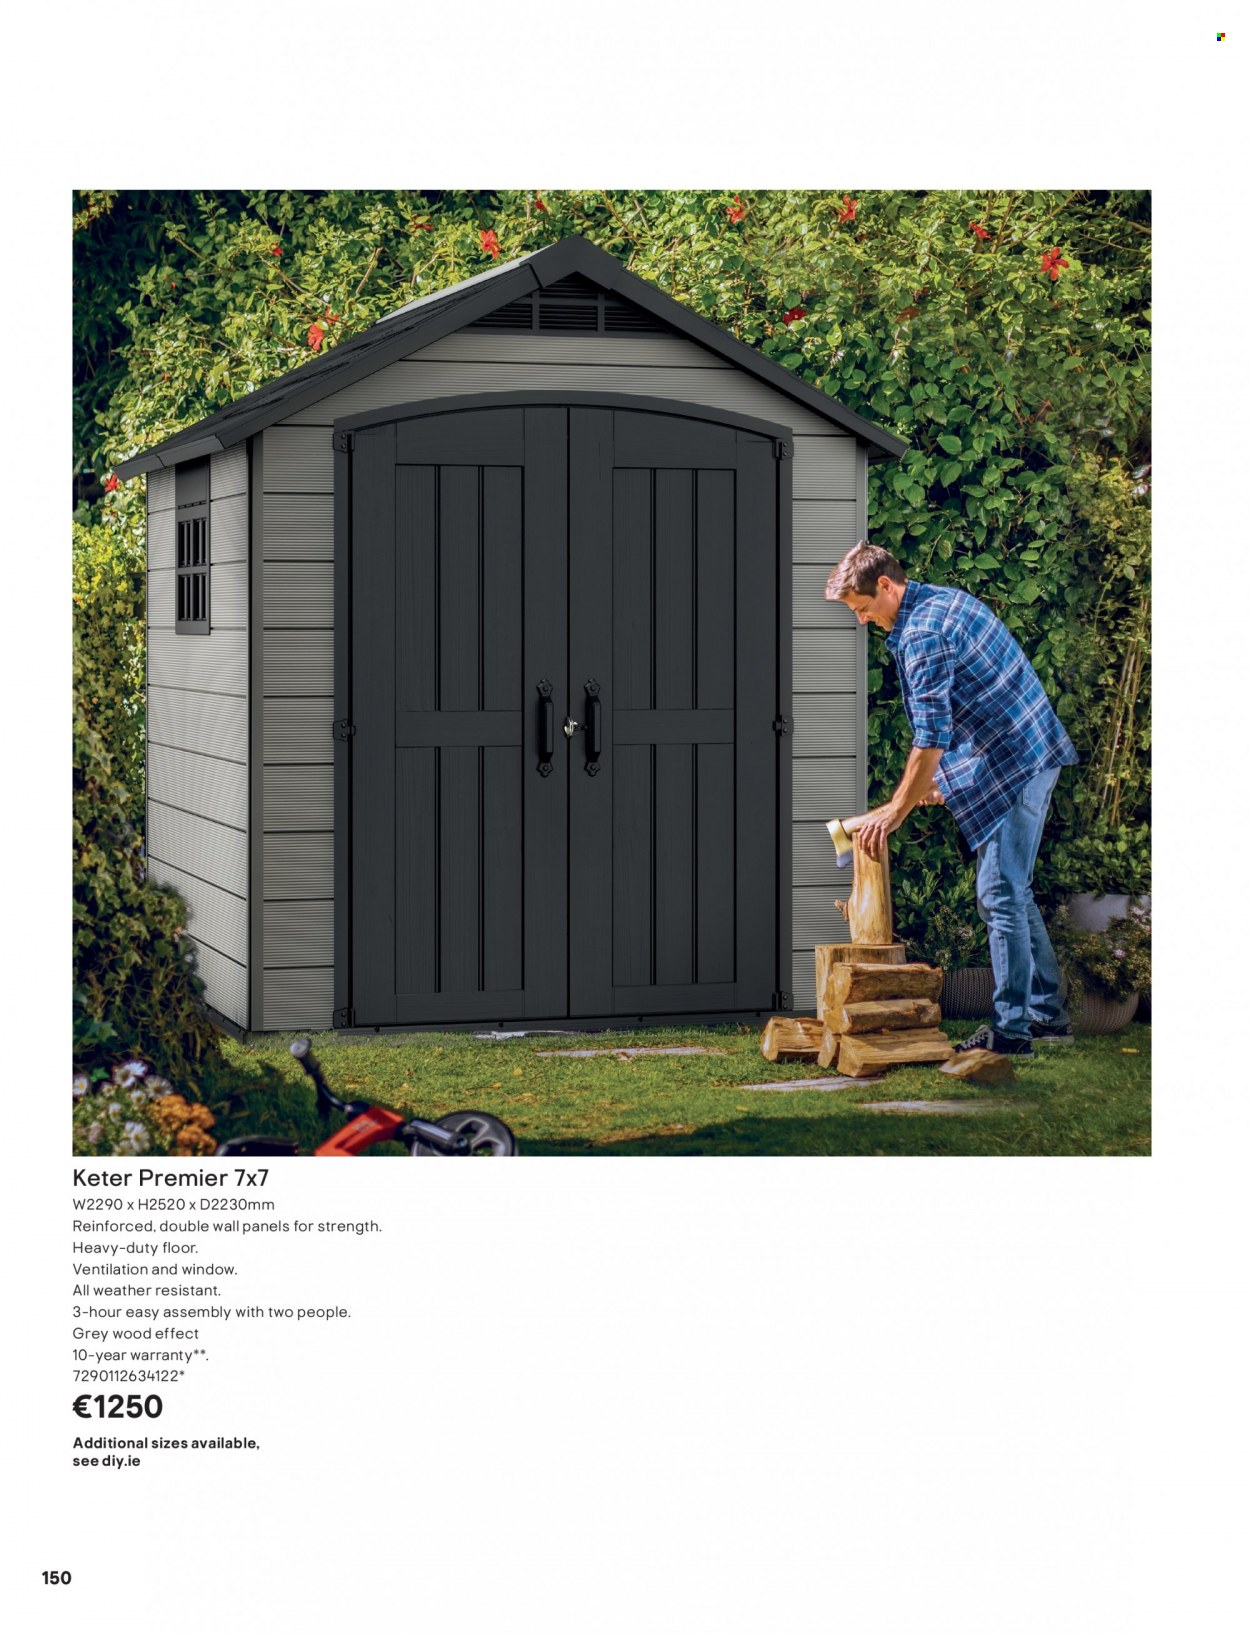 B&Q offer . Page 150.